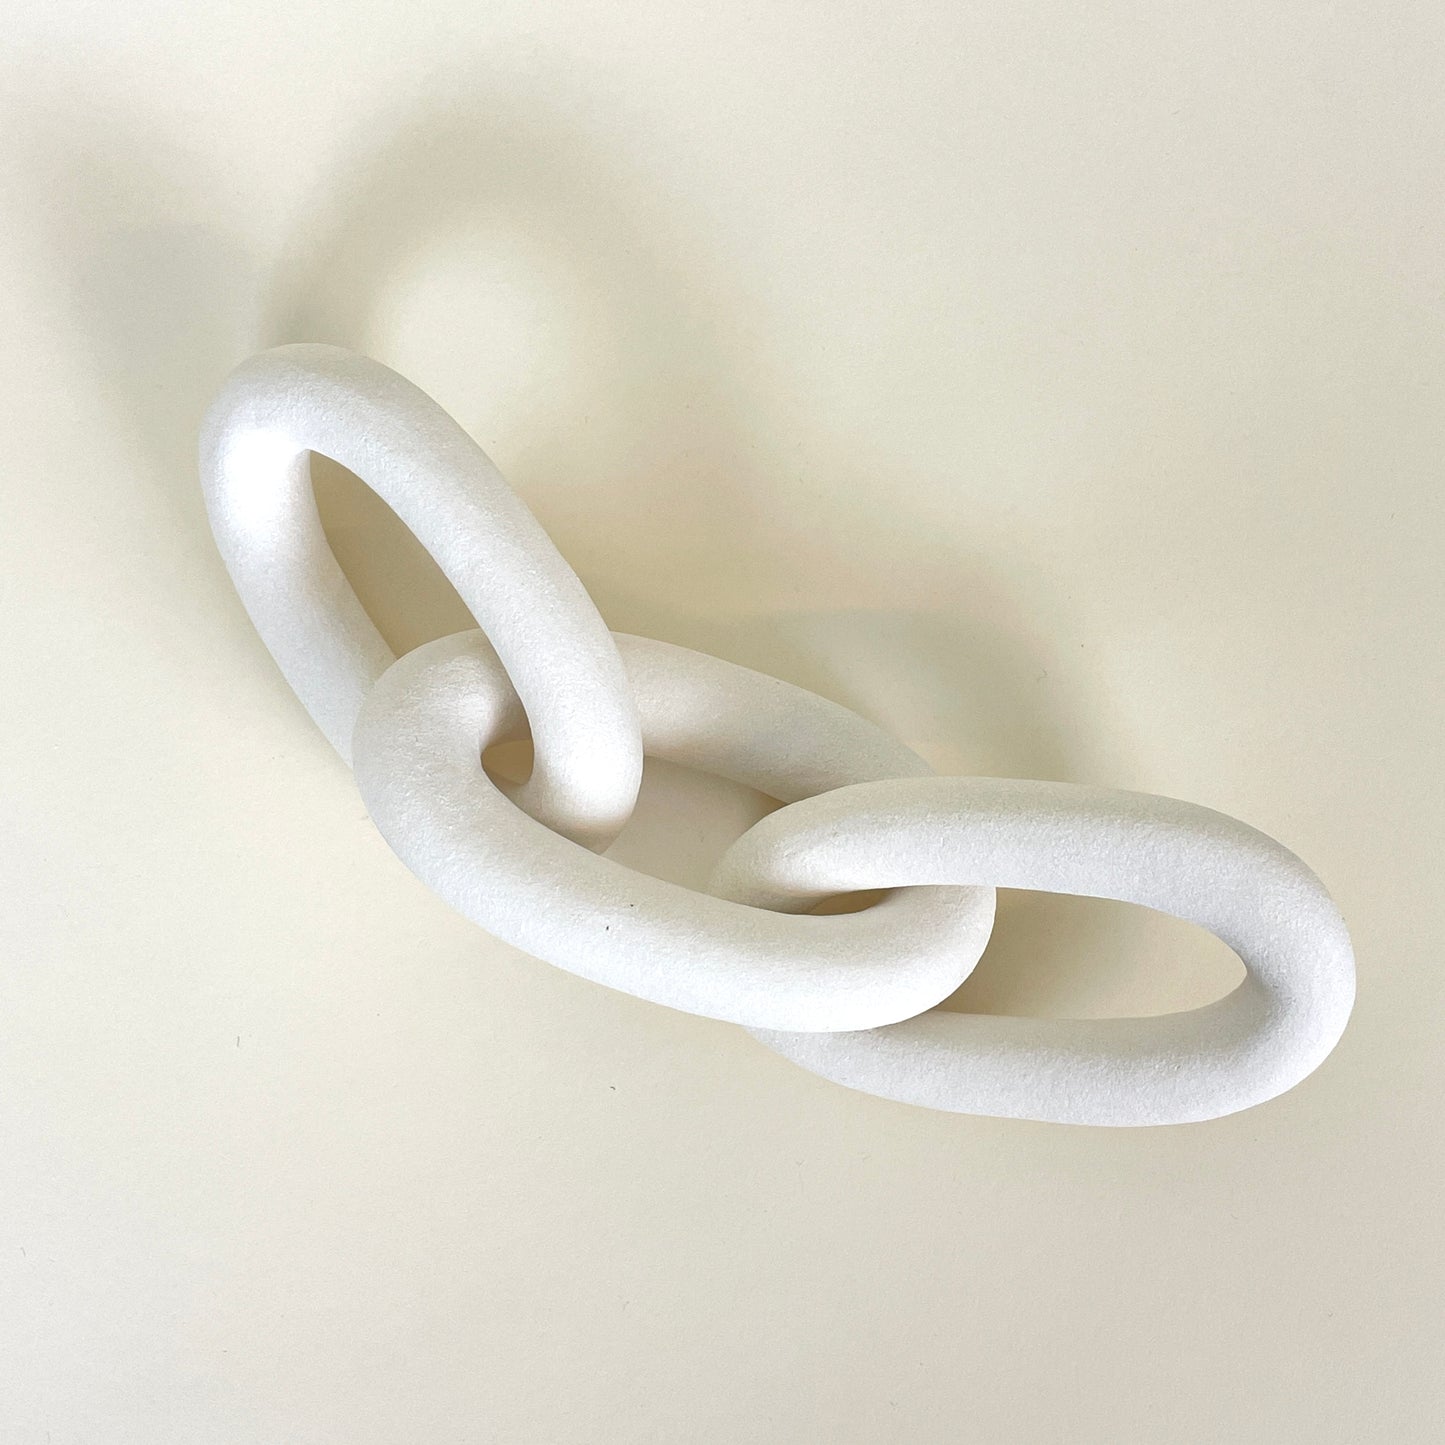 Chain, 3 links, by Kerstin Olsson